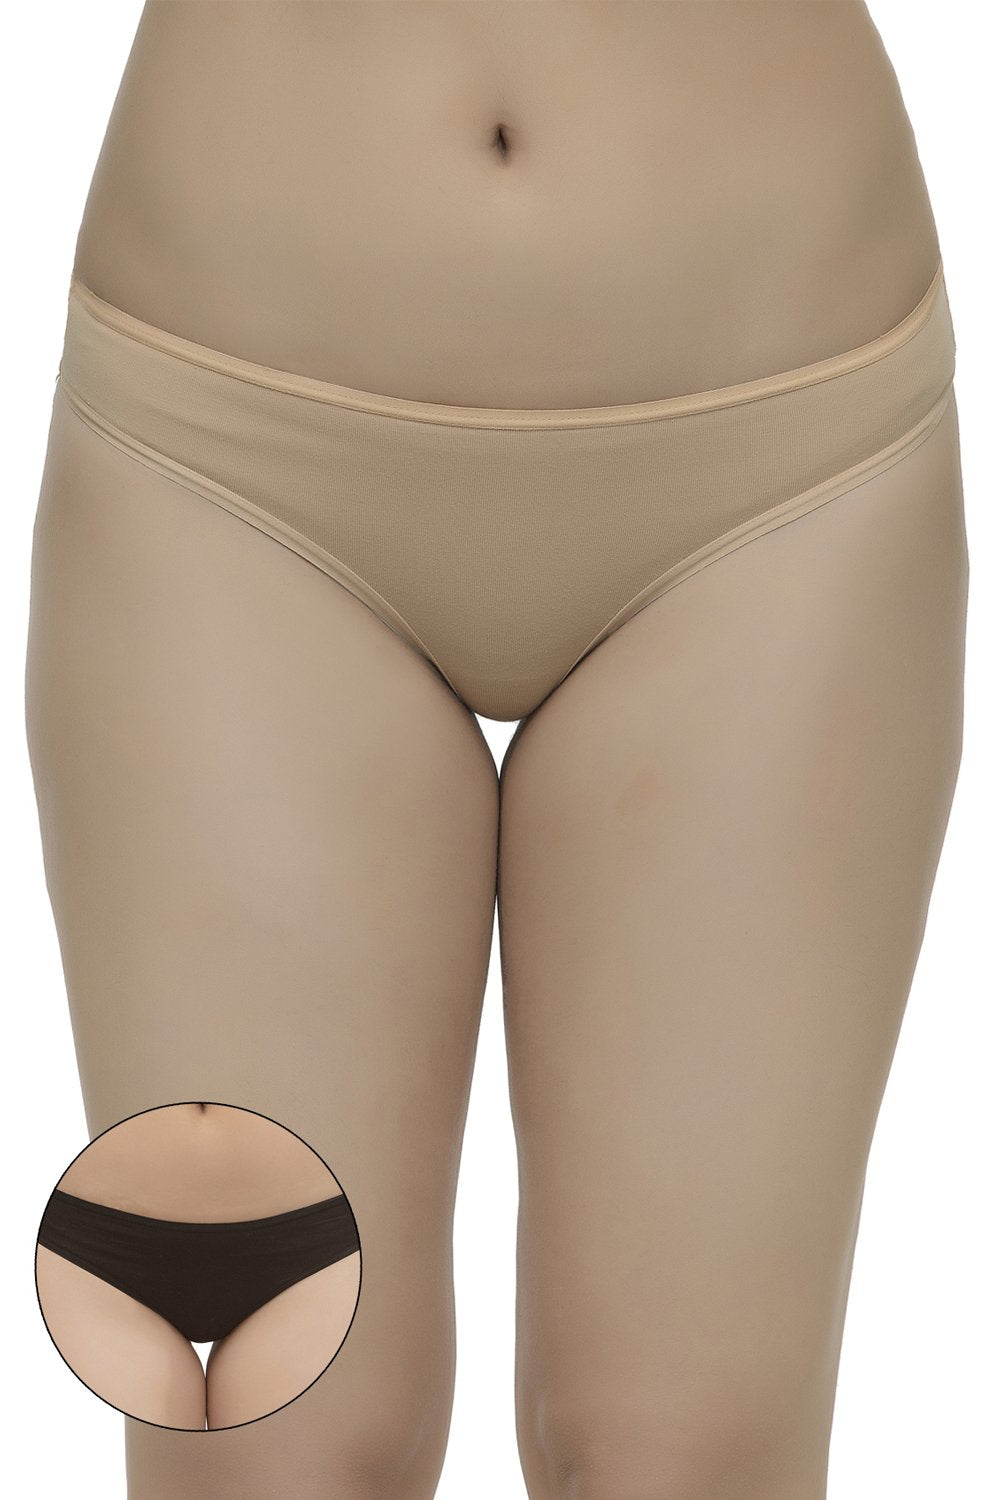 Buy Inner Sense Organic Cotton Antimicrobial Maternity Panty - Nude (Pack  of 2) online